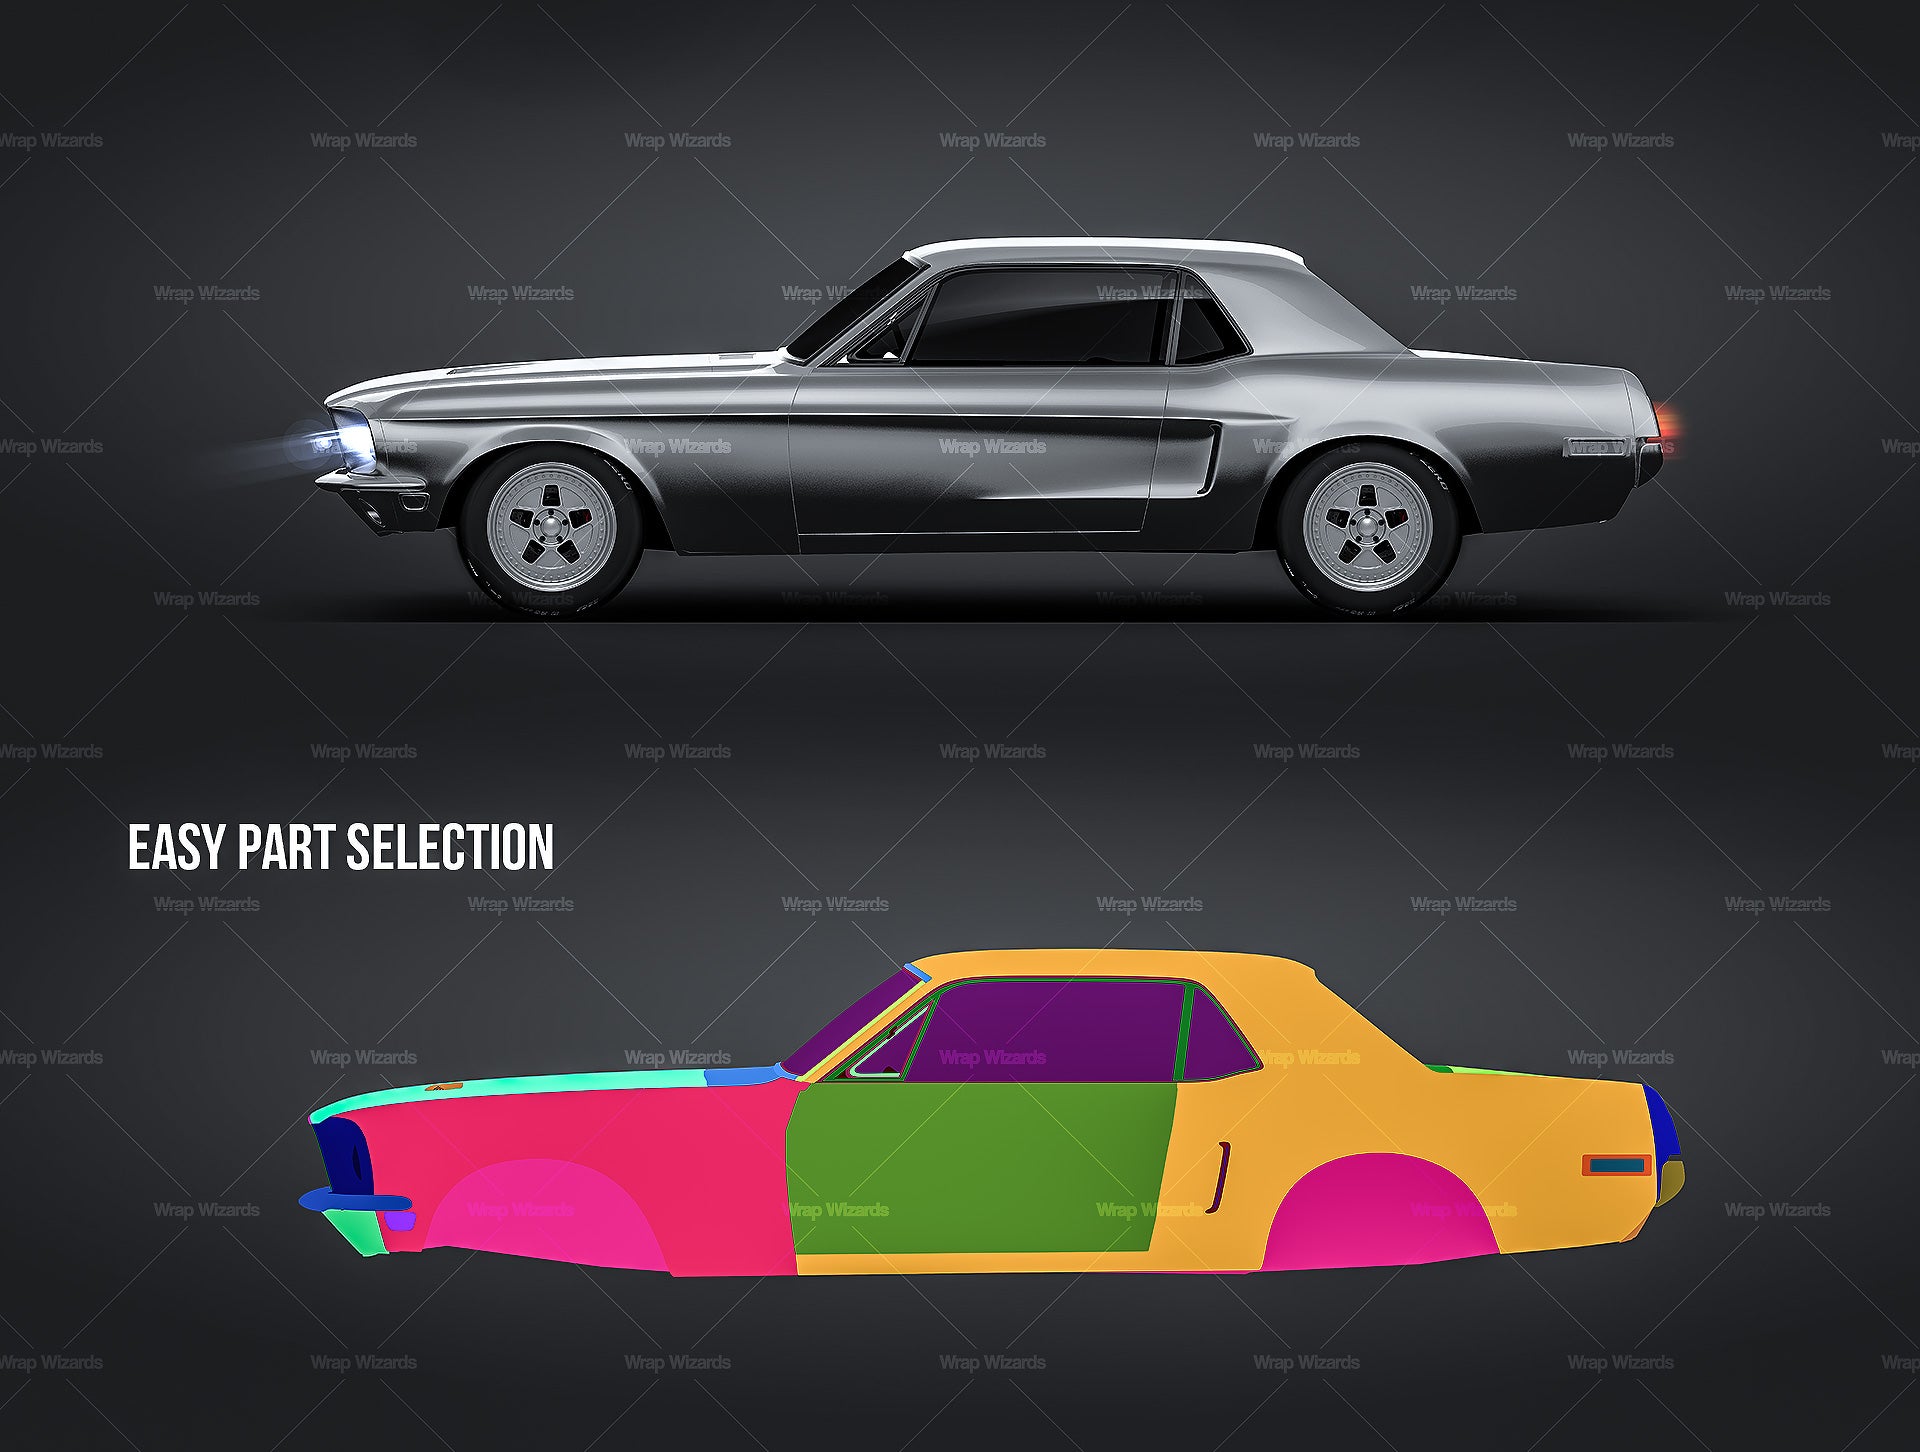 Ford Mustang '68 customized glossy finish - all sides Car Mockup Template.psd